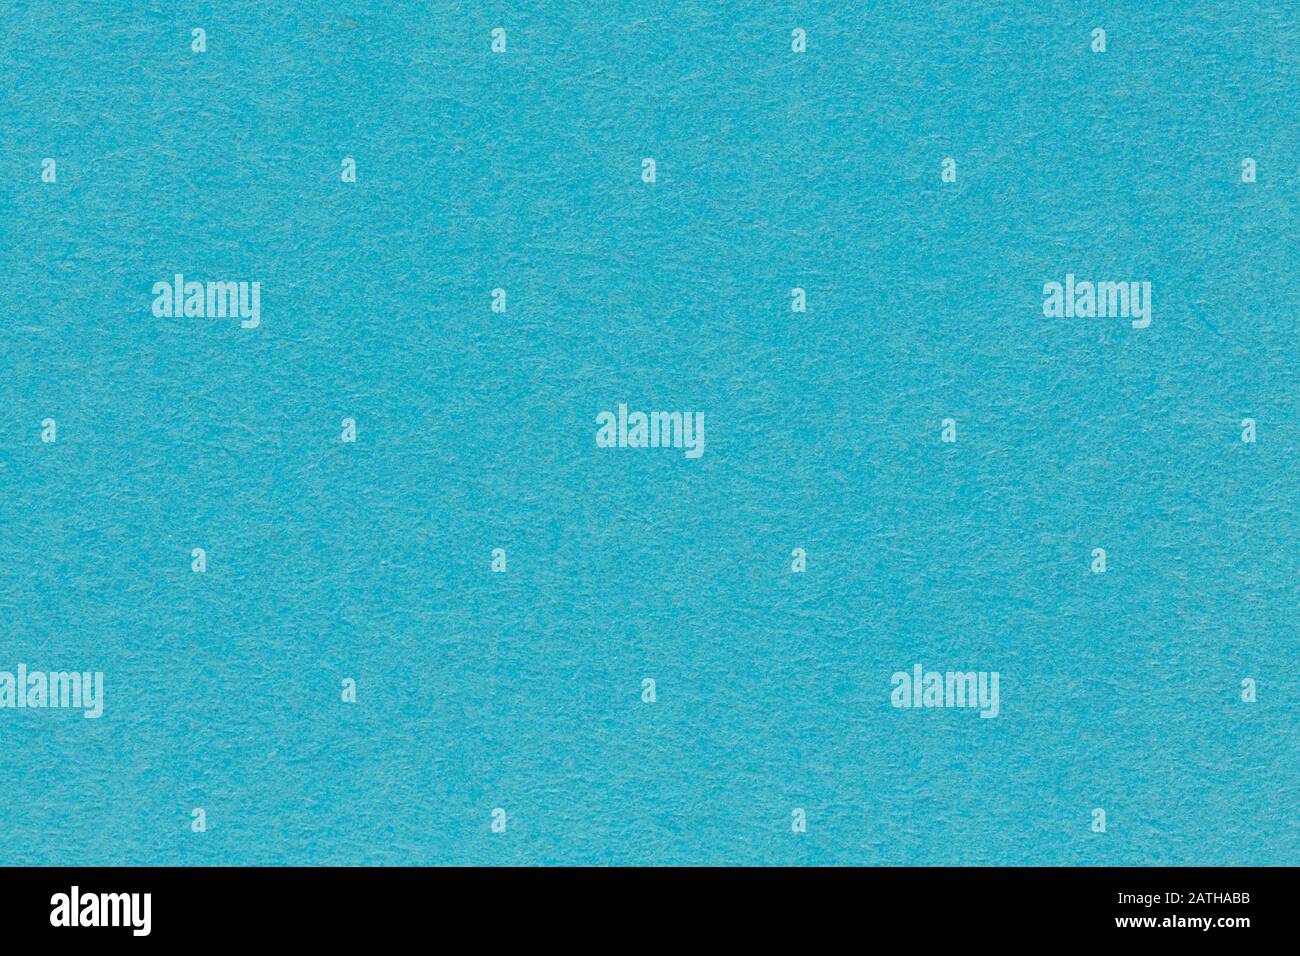 Abstract light blue paper background, solid surface. Stock Photo